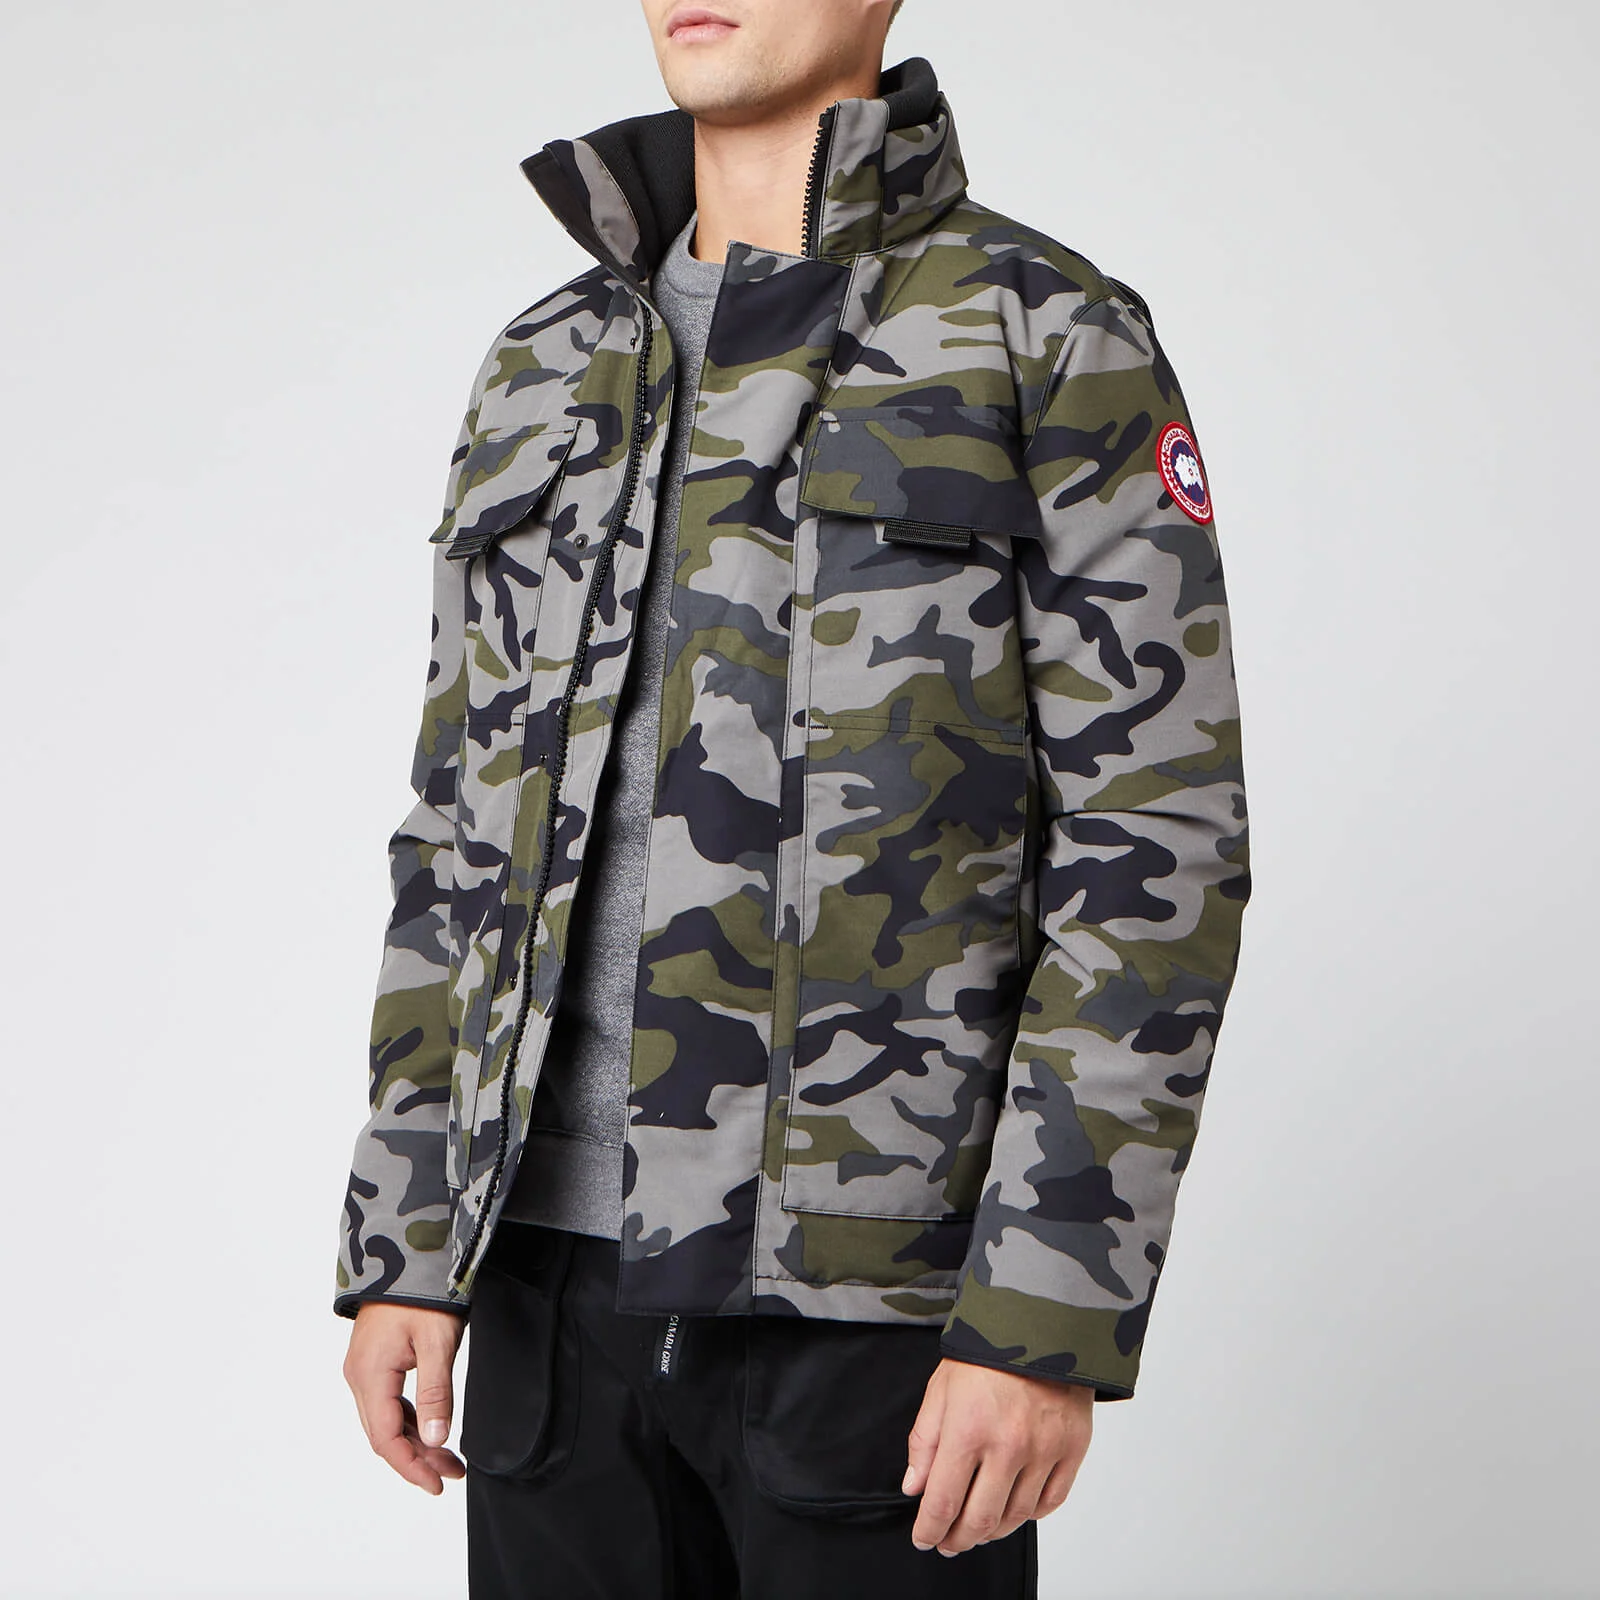 Canada Goose Men's Forester Jacket - Classic Camo Image 1